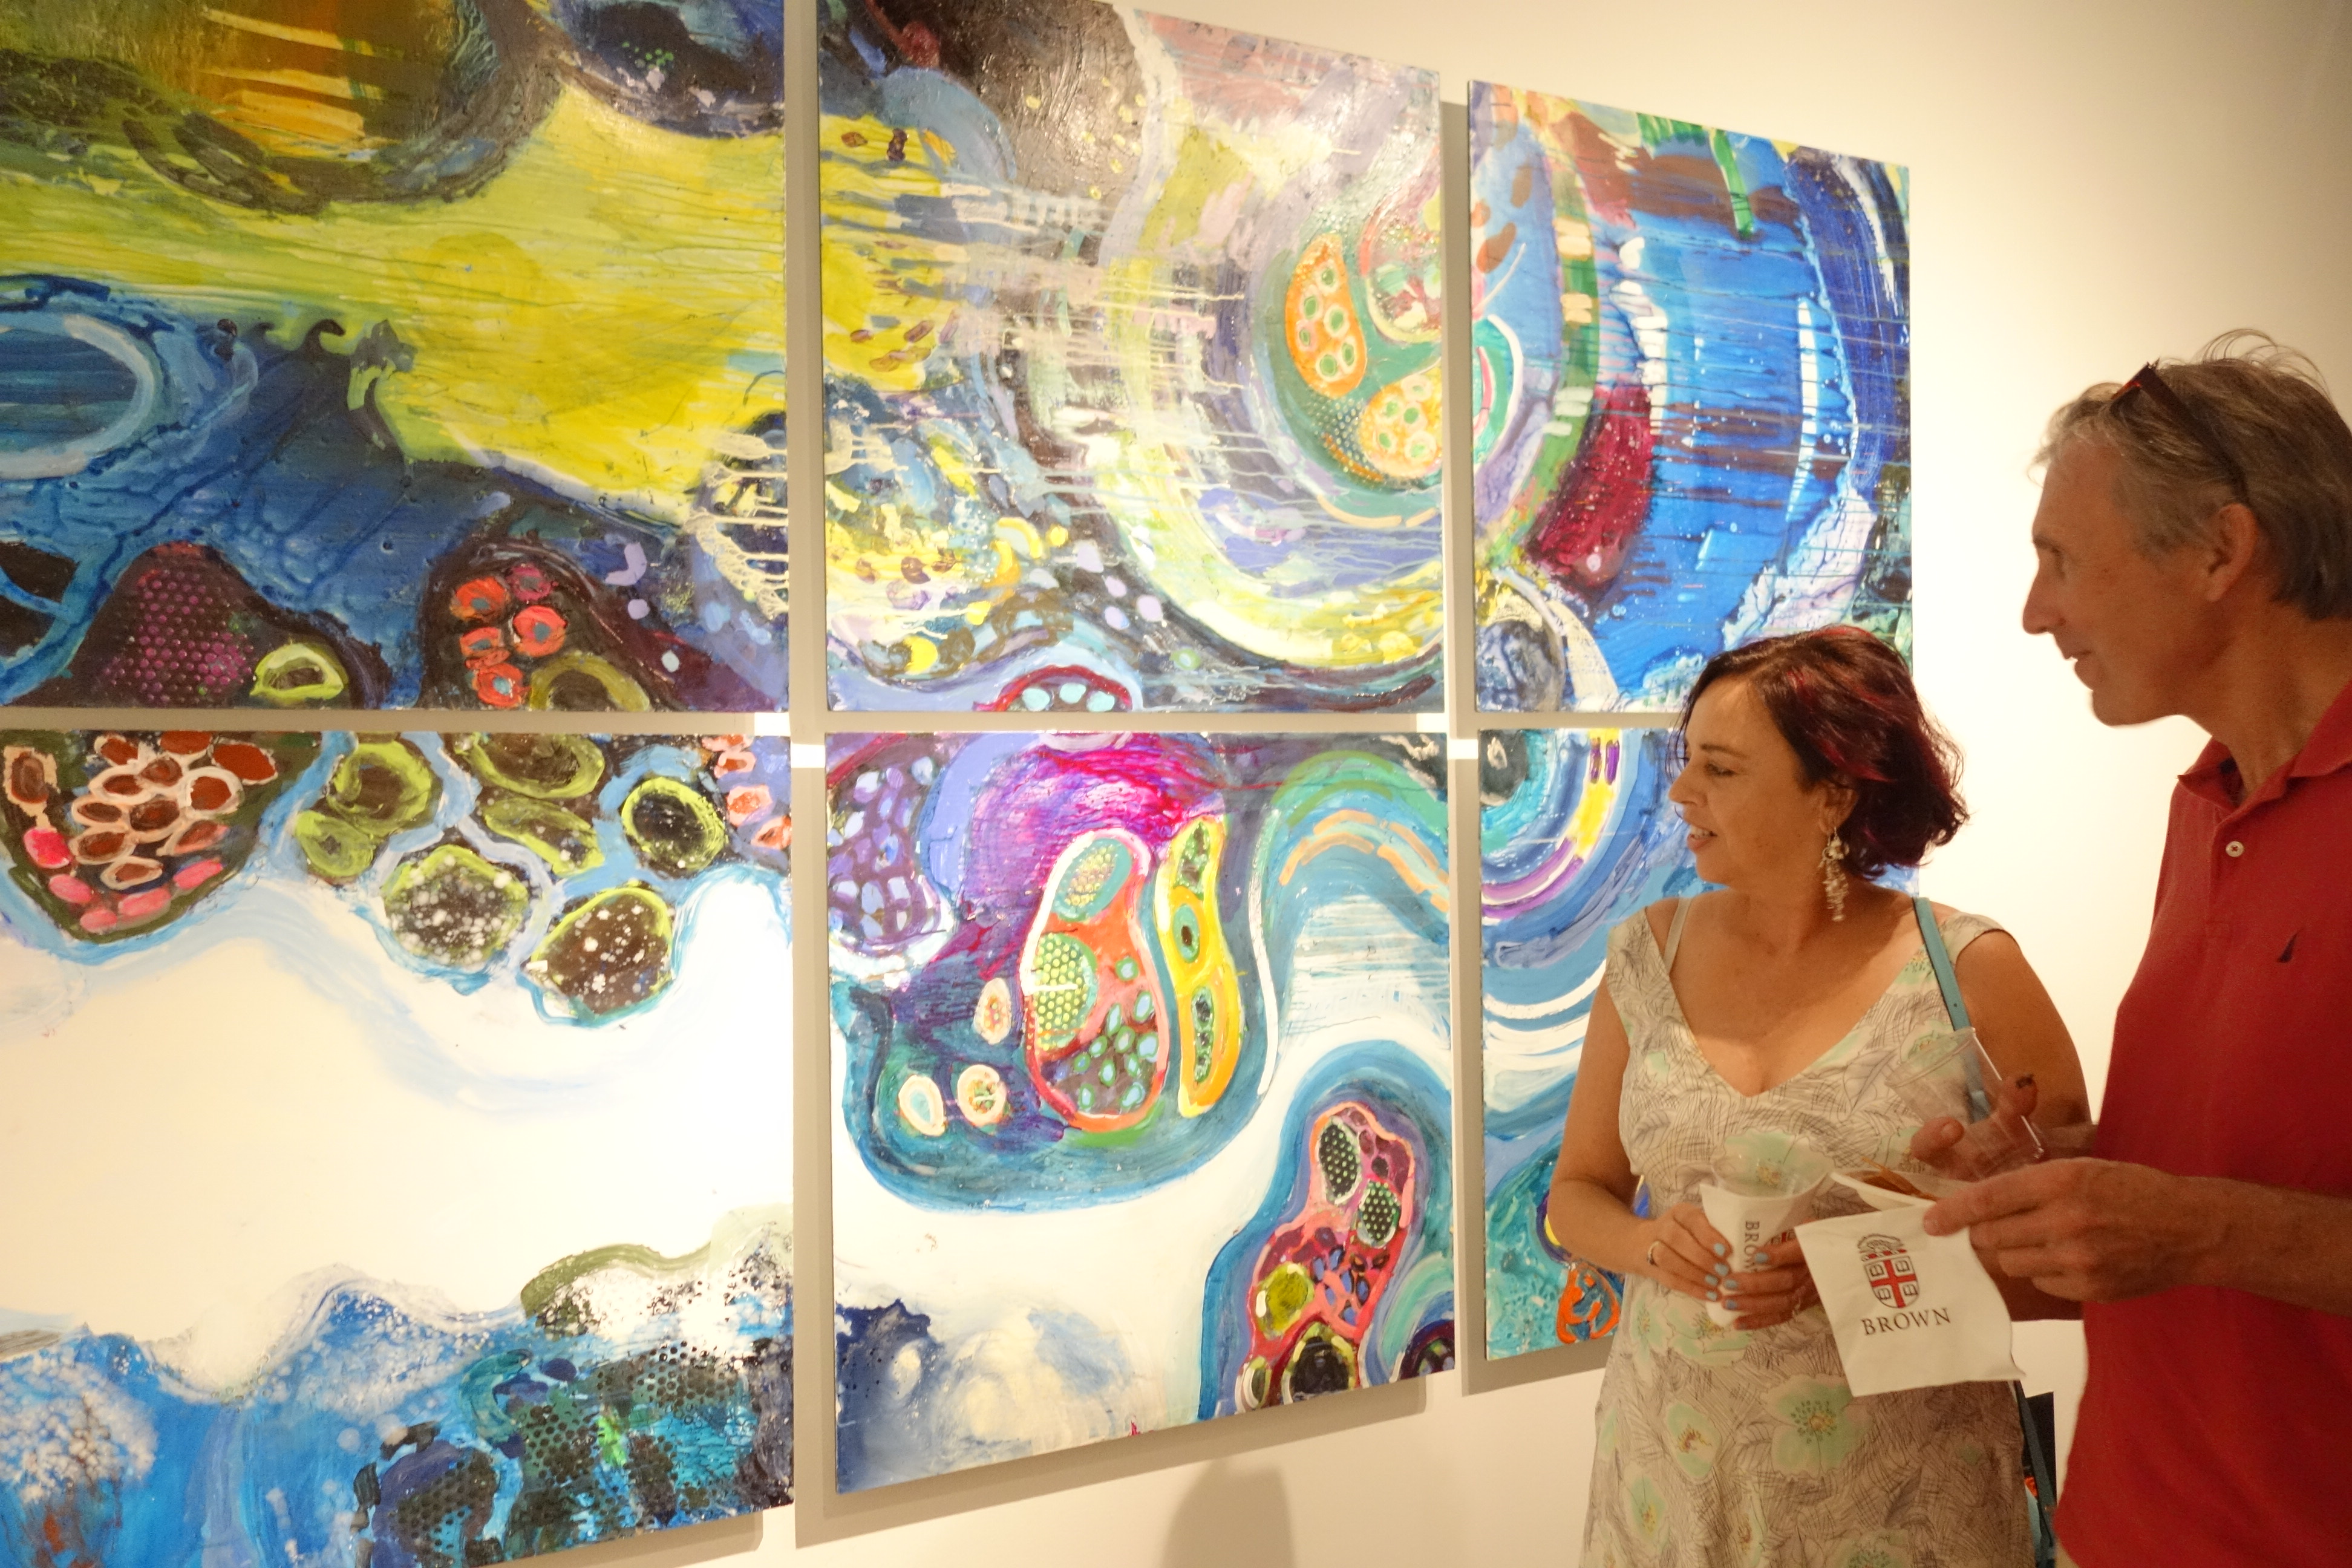 A woman standing in front of some paintings